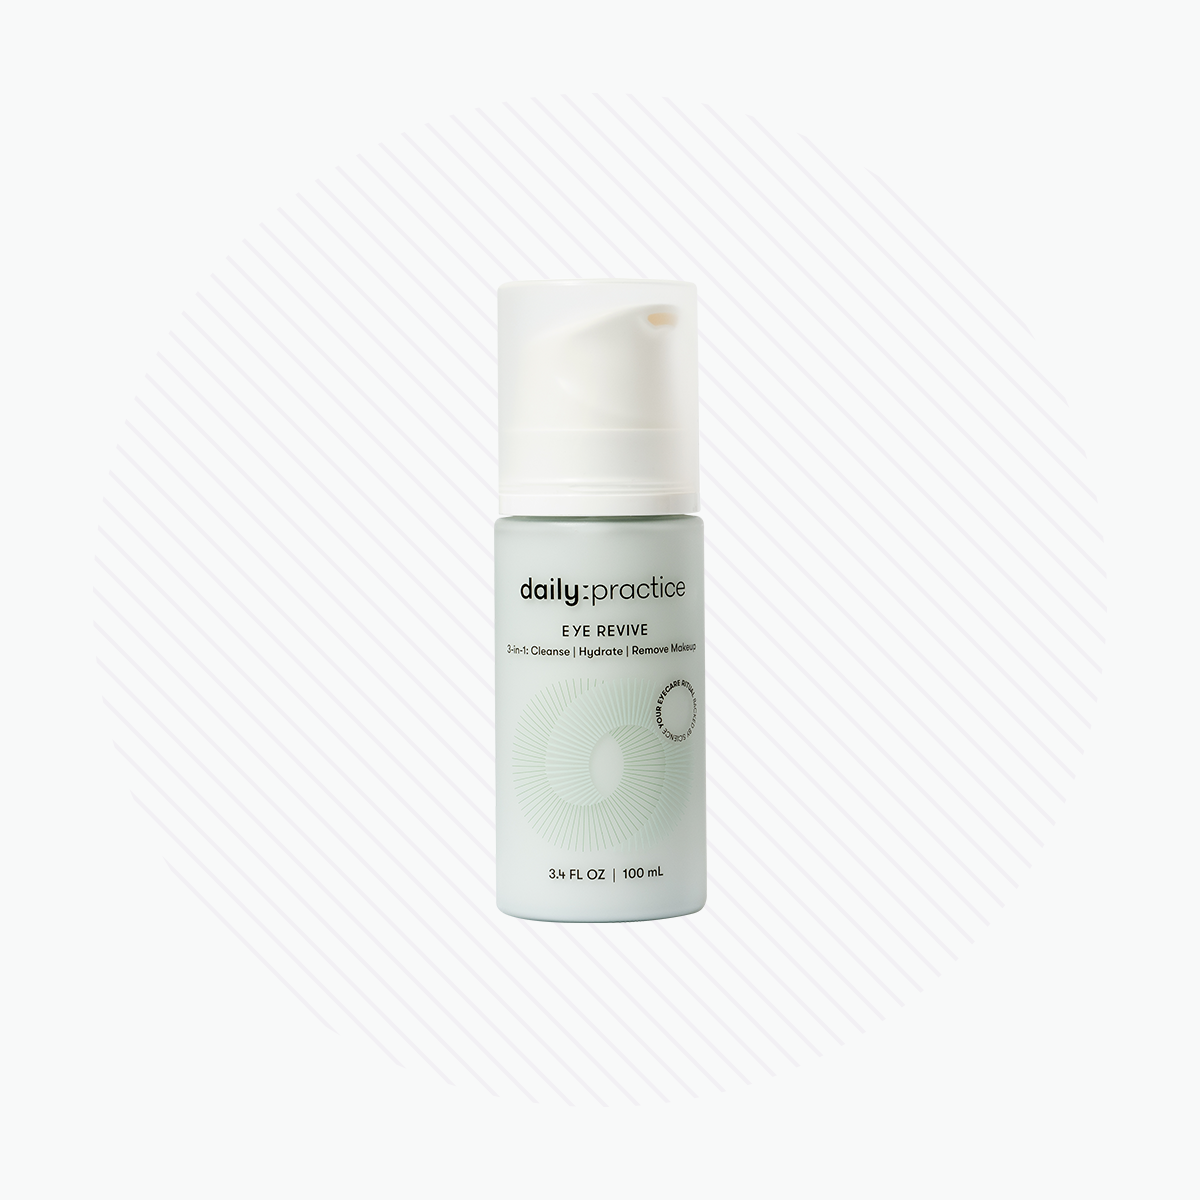 Daily Practice - Eye Revive Foam - 3-in-1 Eye Care Cleanser to Cleanse, Hydrate and Brighten Around the Eyes (3.4oz Bottle) 100ml